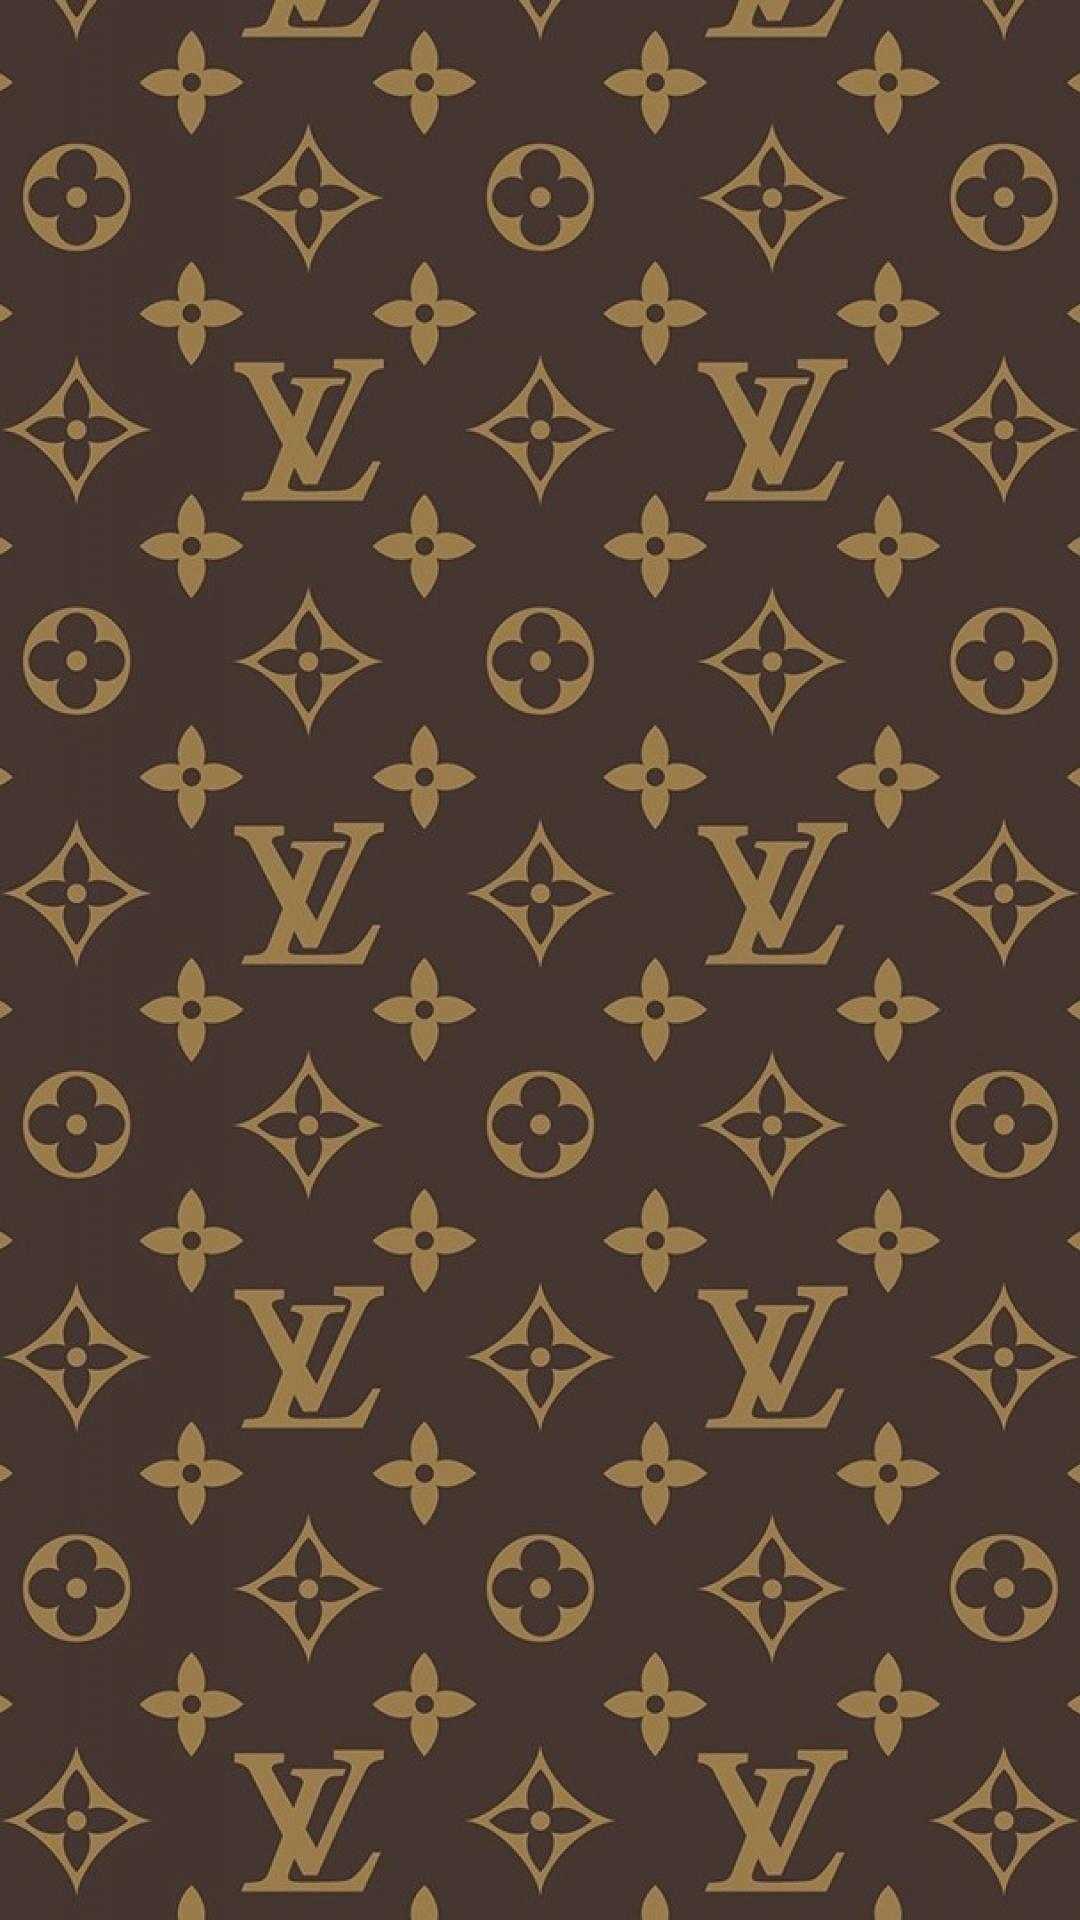 Lv Backgrounds